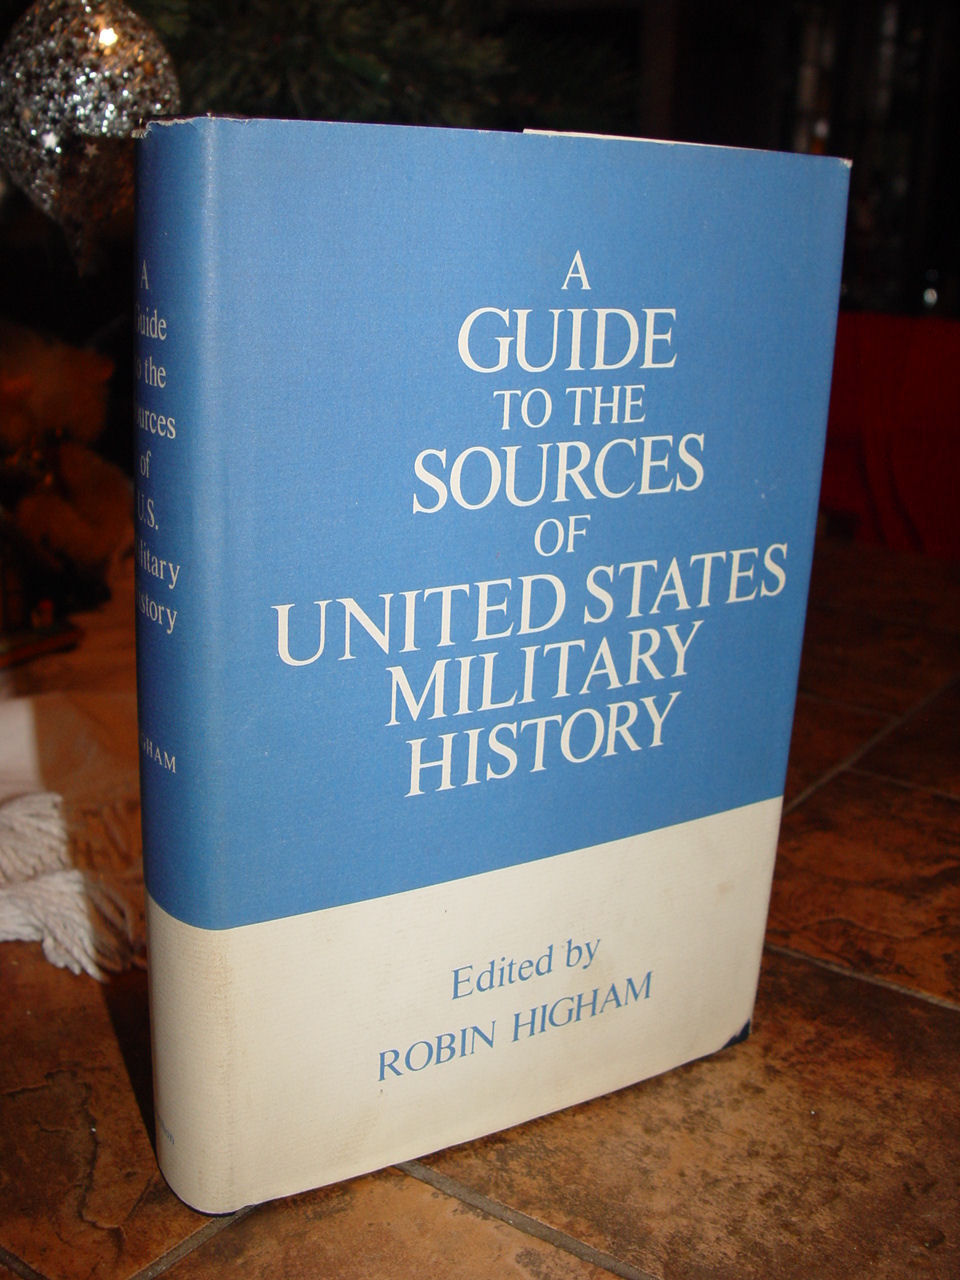 Guide to the
                        Sources of United States Military History 1975
                        by R. Higham